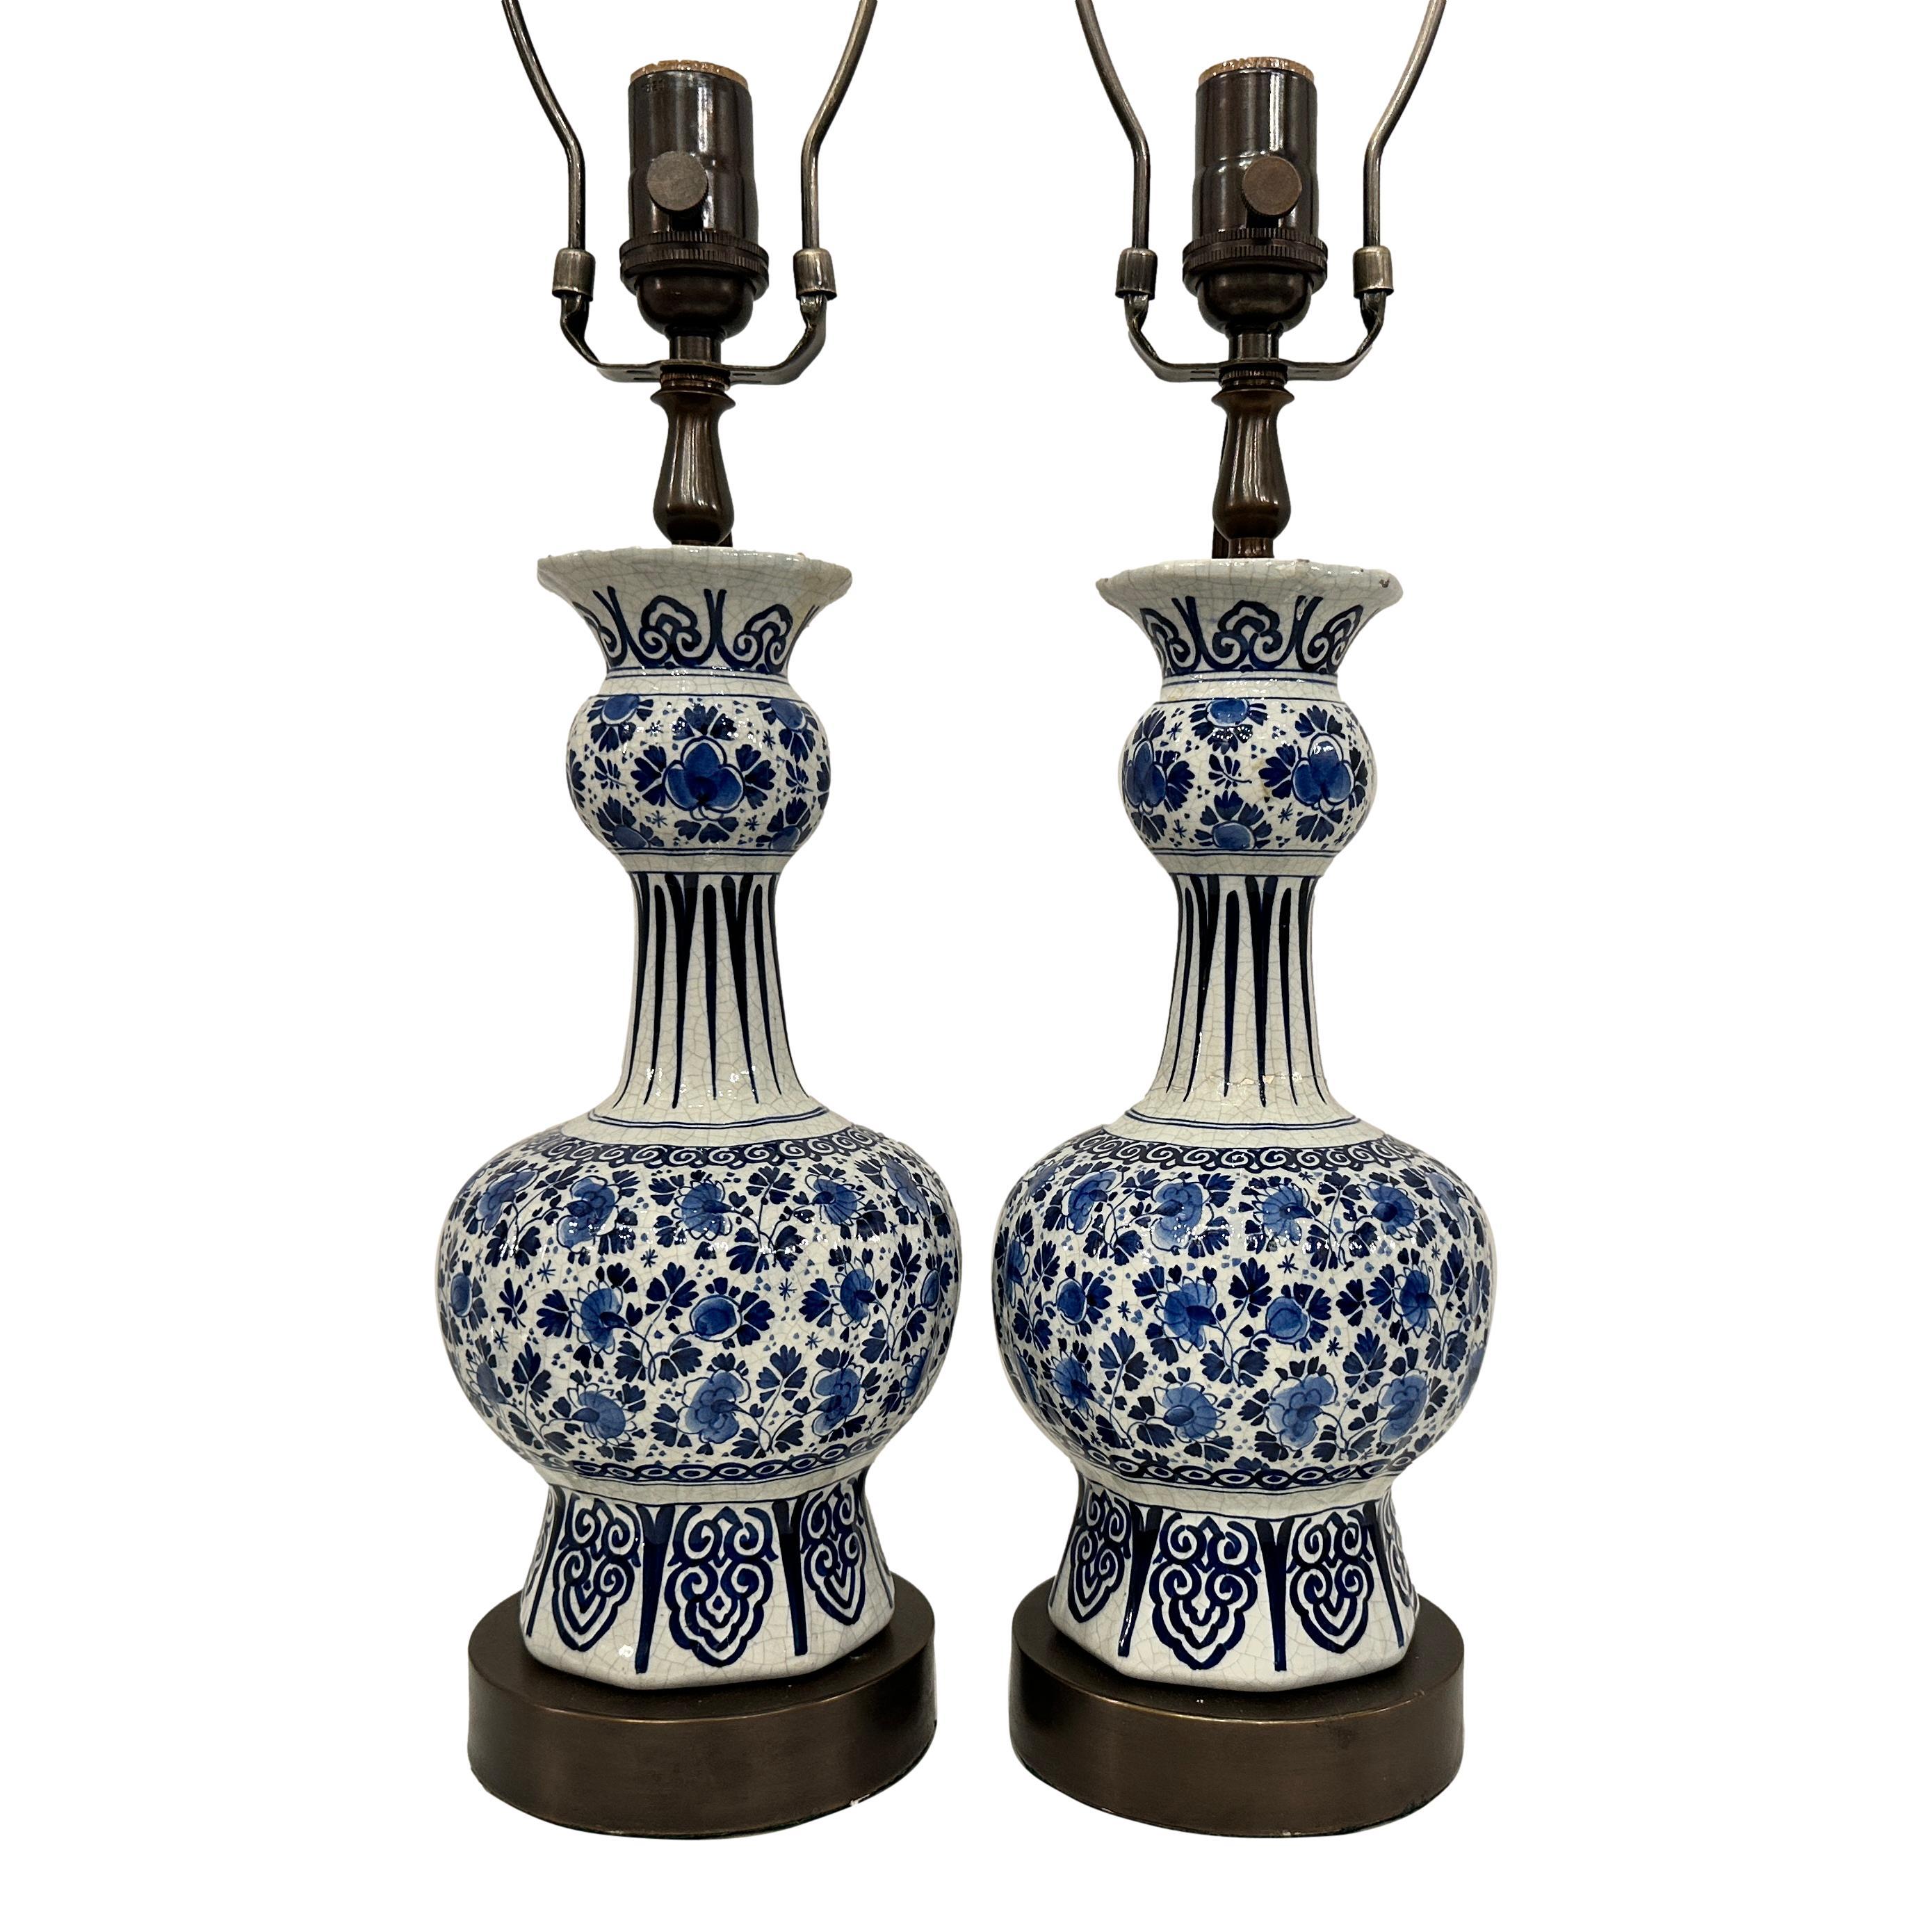 Pair of circa 1920's hand-painted Dutch porcelain table lamps.

Measurements:
Height of body: 14